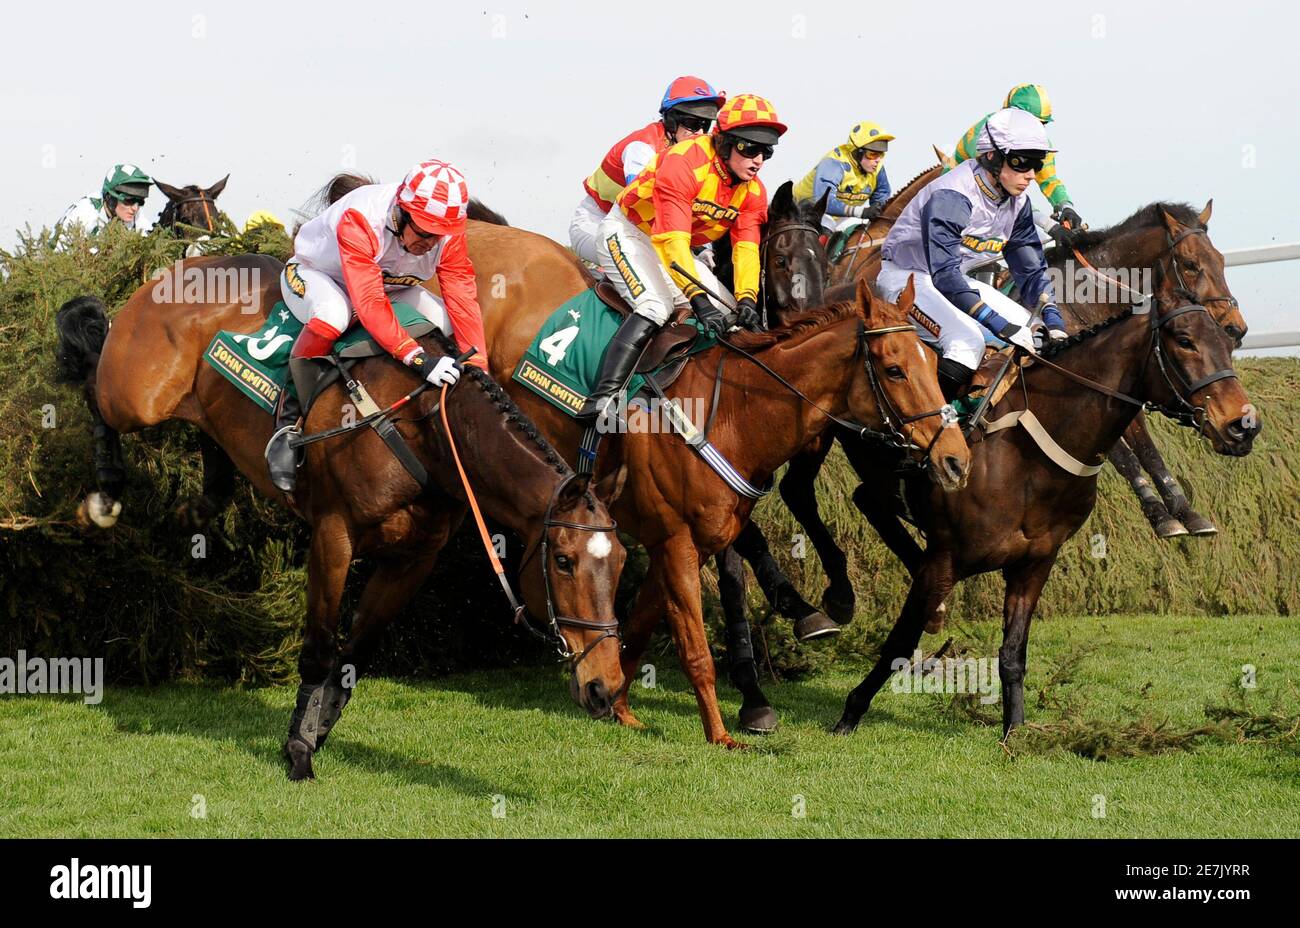 Launde ridden by jockey Ward-Thomas (L), Blu Teen ridden by jockey Mahon and Sonevafushi ridden by jockey Jake Greenall jumps the Chair in the Fox Hunters' Steeple Chase during the first day of The Grand National Meeting at Aintree Racecourse, Liverpool, northern England April 8, 2010.    REUTERS/Russell Cheyne (BRITAIN - Tags: SPORT HORSE RACING) Stock Photo